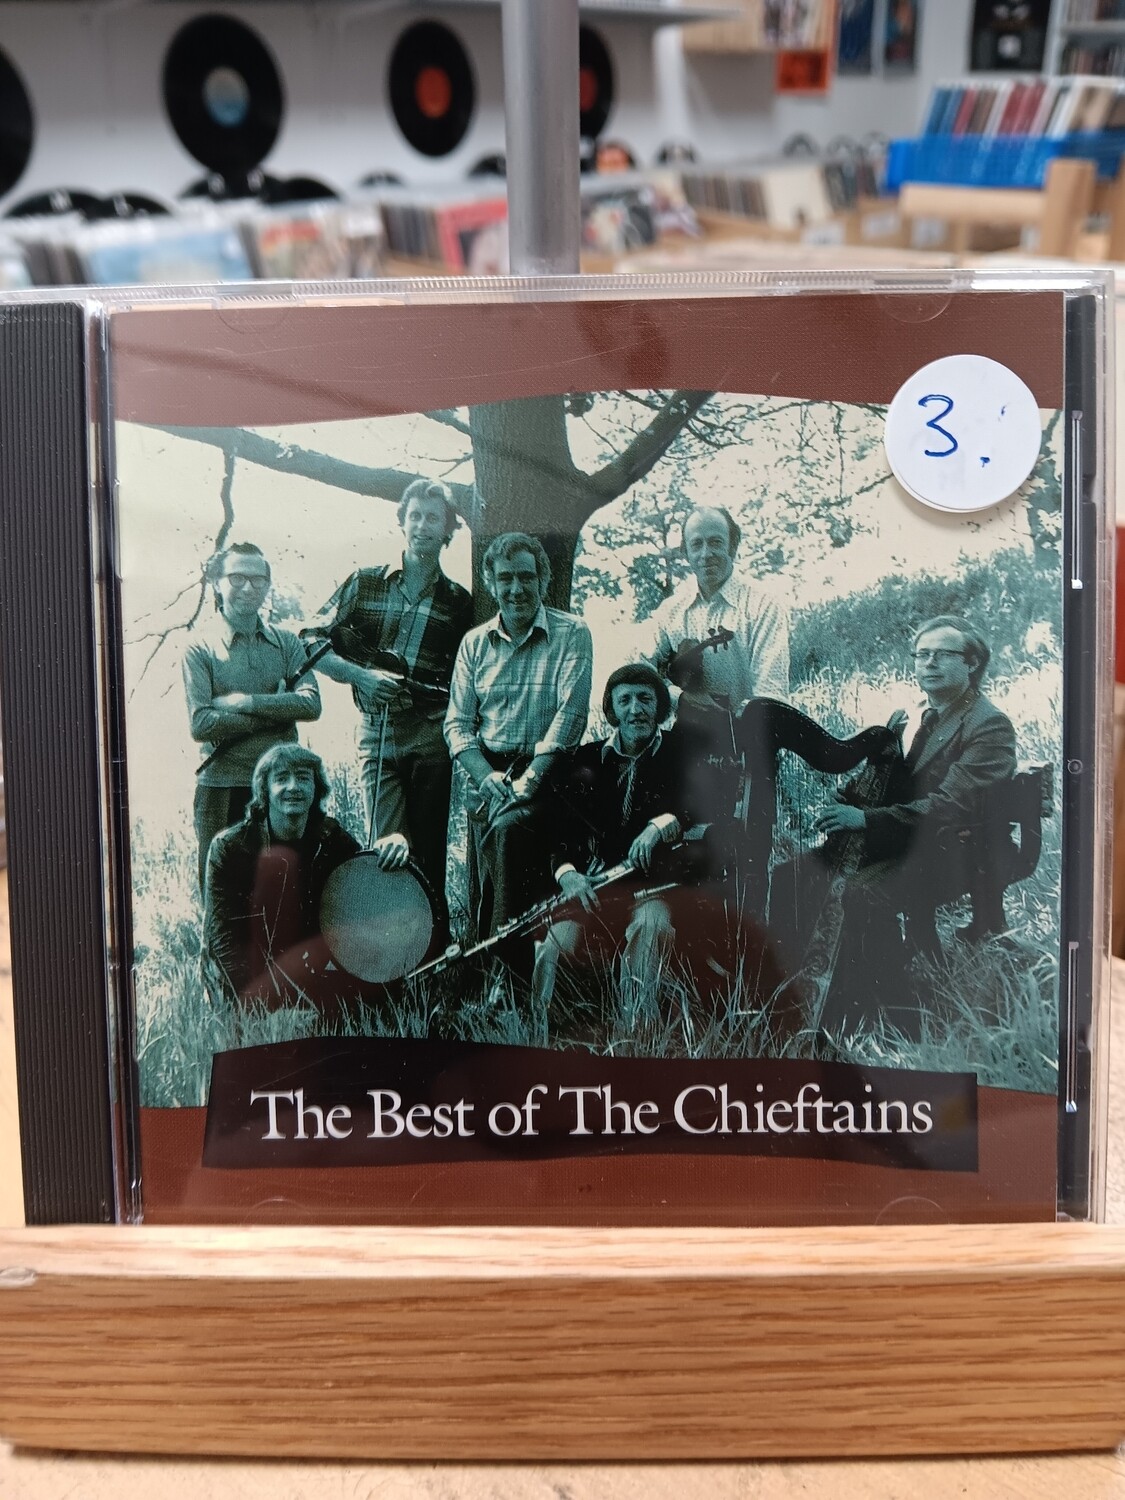 THE CHIEFTAINS - The Best of The Chieftains (CD)